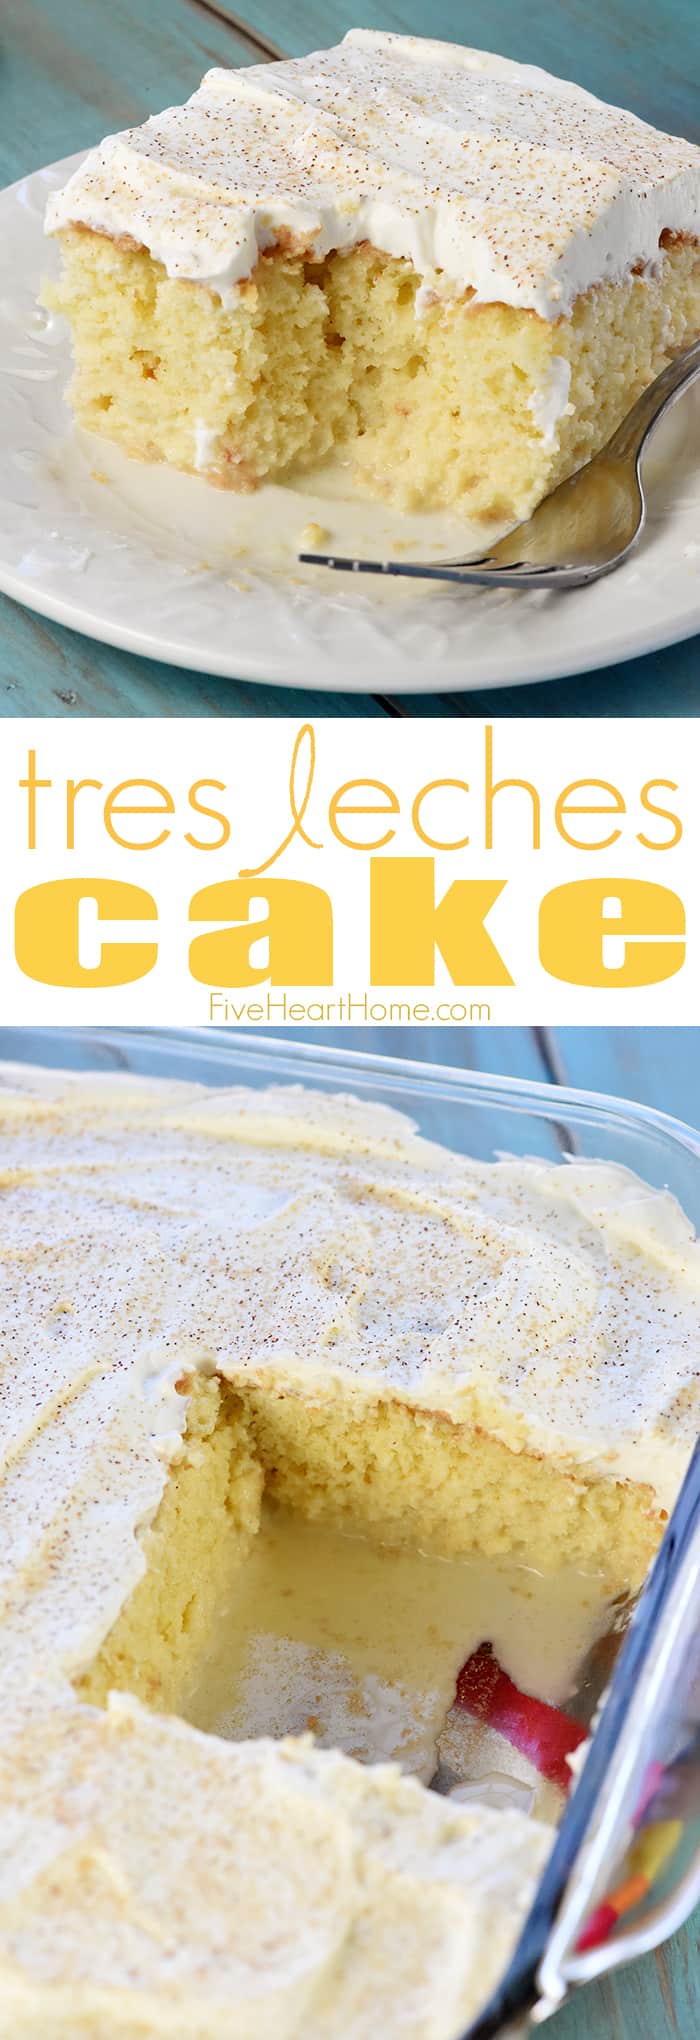 Tres Leches Cake, 2 photo collage with text overlay